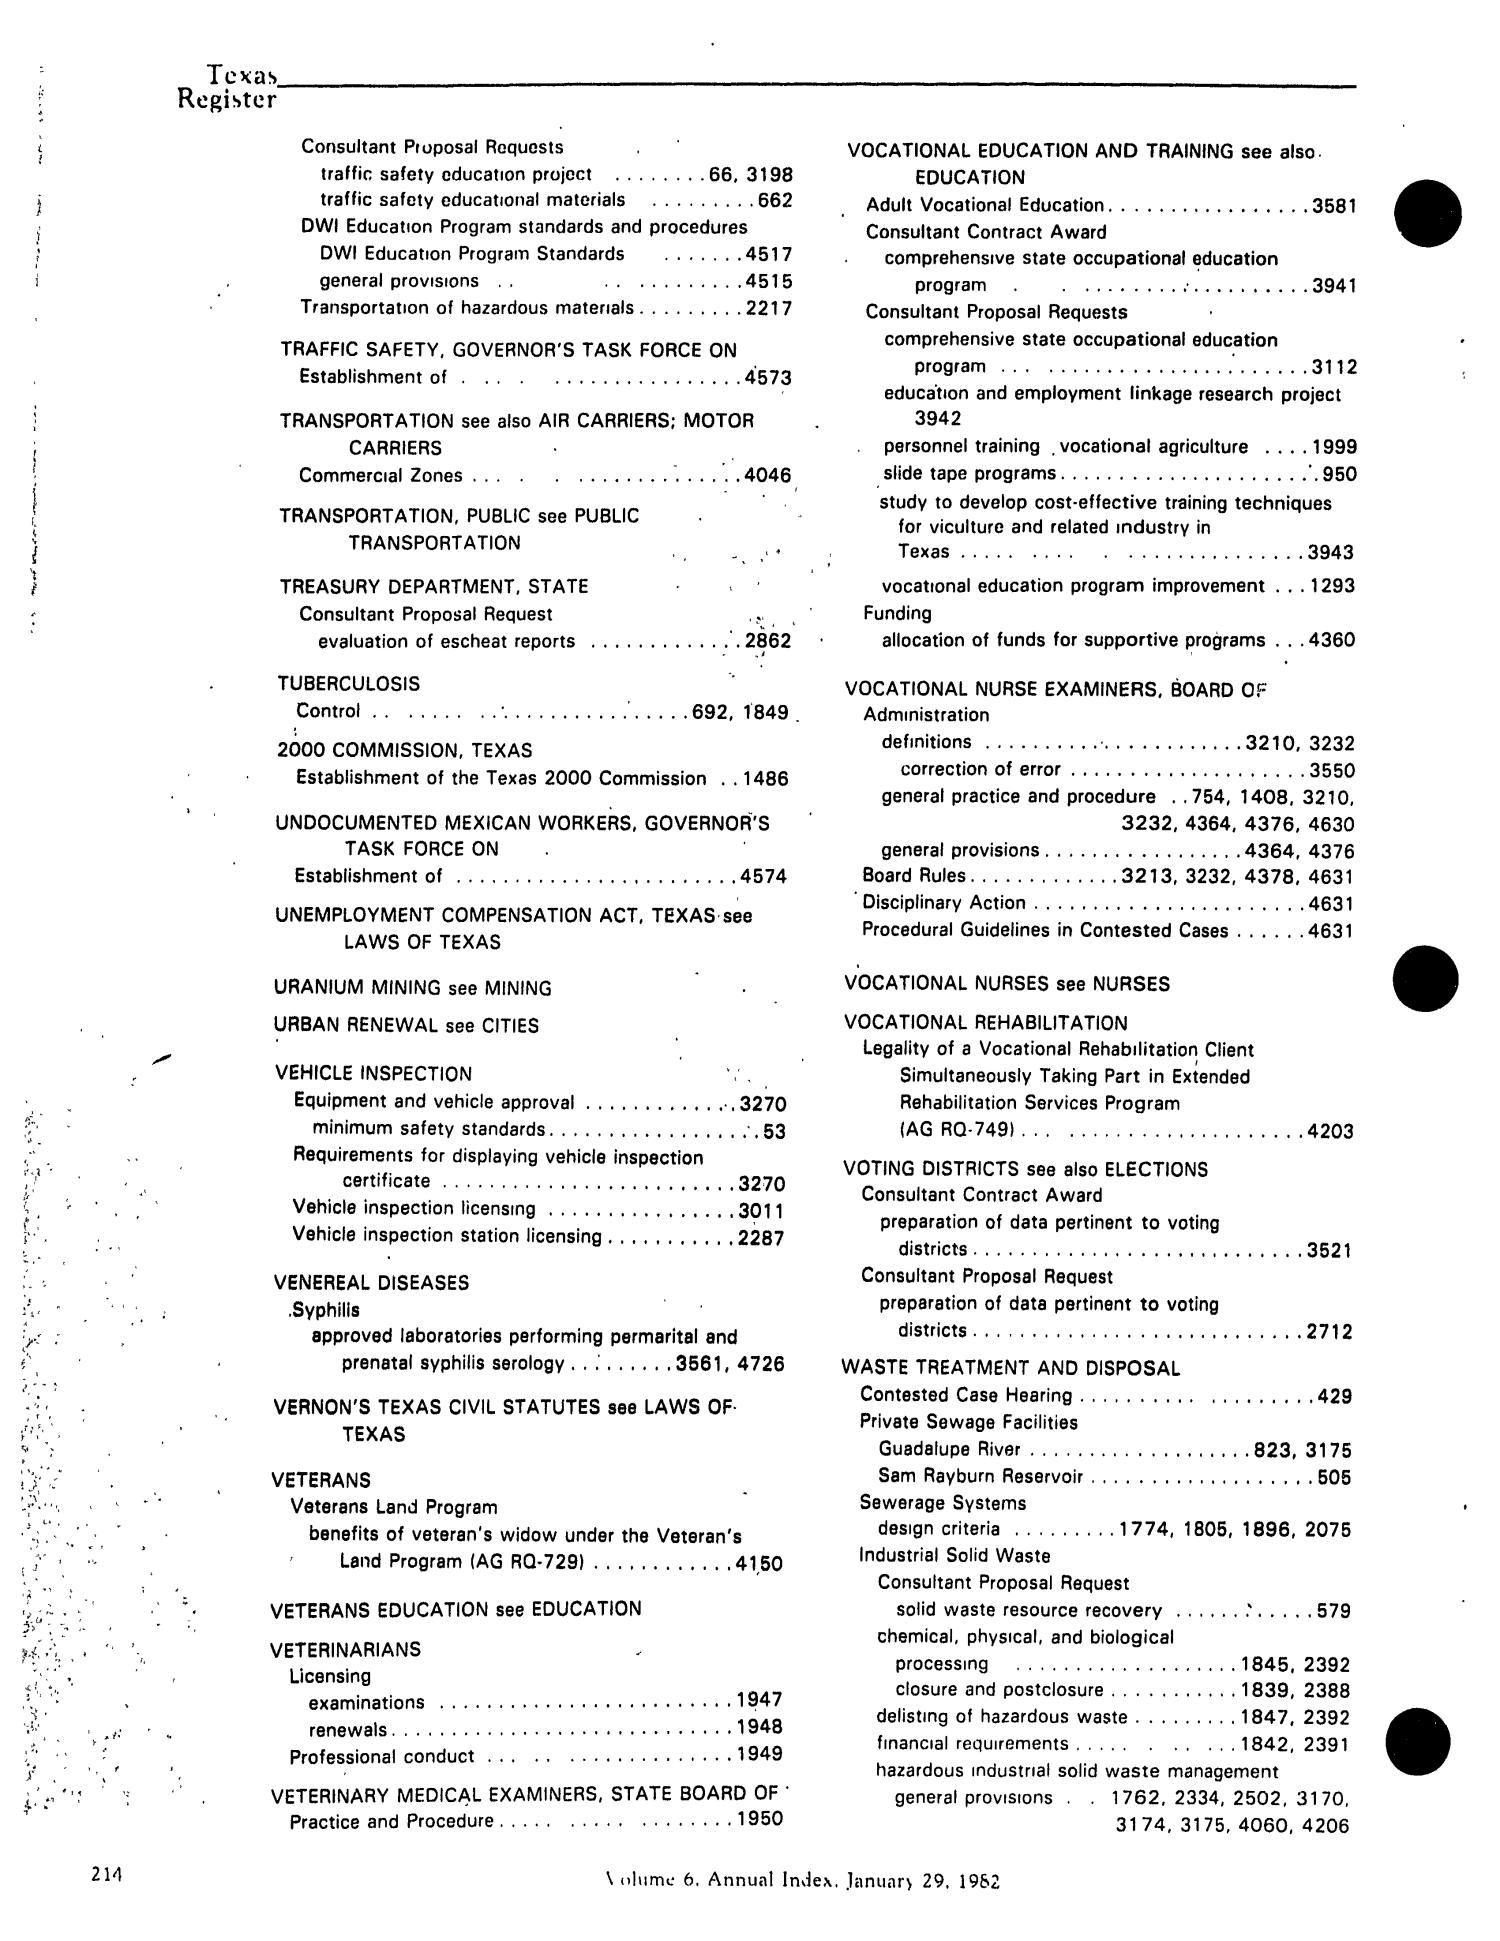 Texas Register, Volume 6, Annual Index, Pages 137-235, January 29, 1981
                                                
                                                    214
                                                